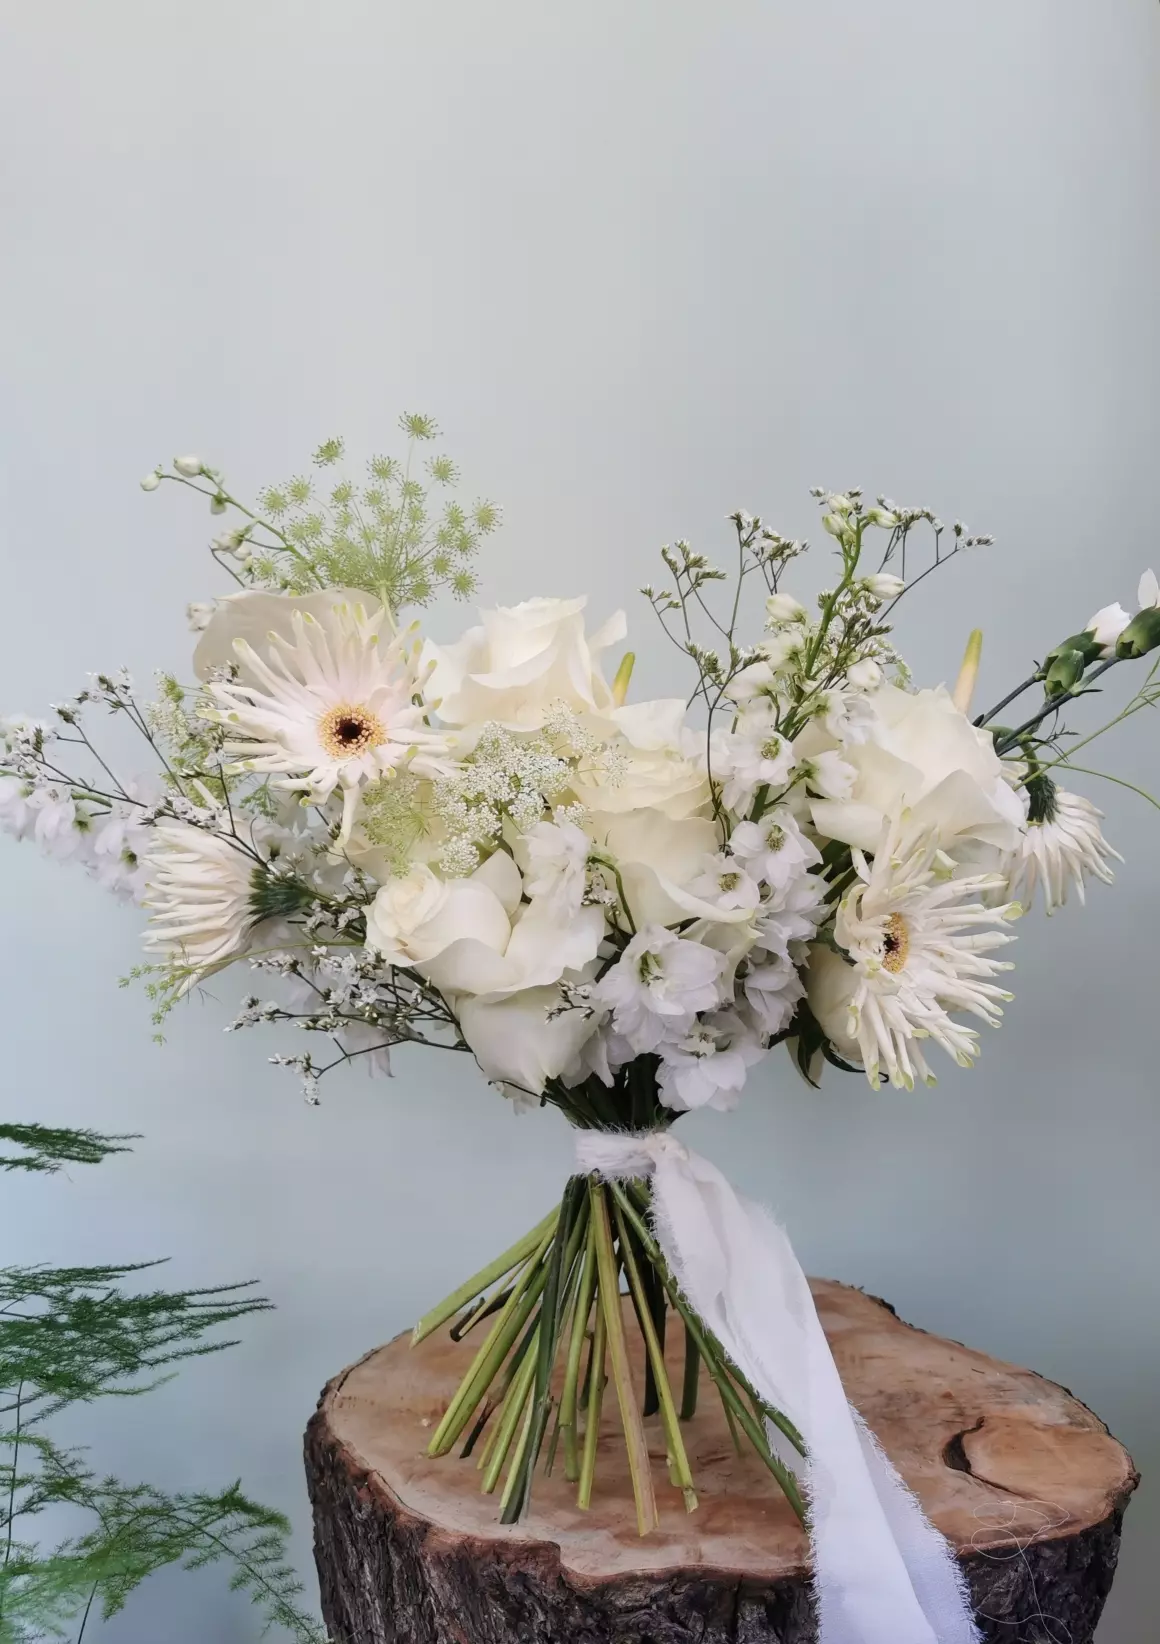 This is an original bouquet proposal for the bride in a relaxed form with a delicate frayed ribbon.